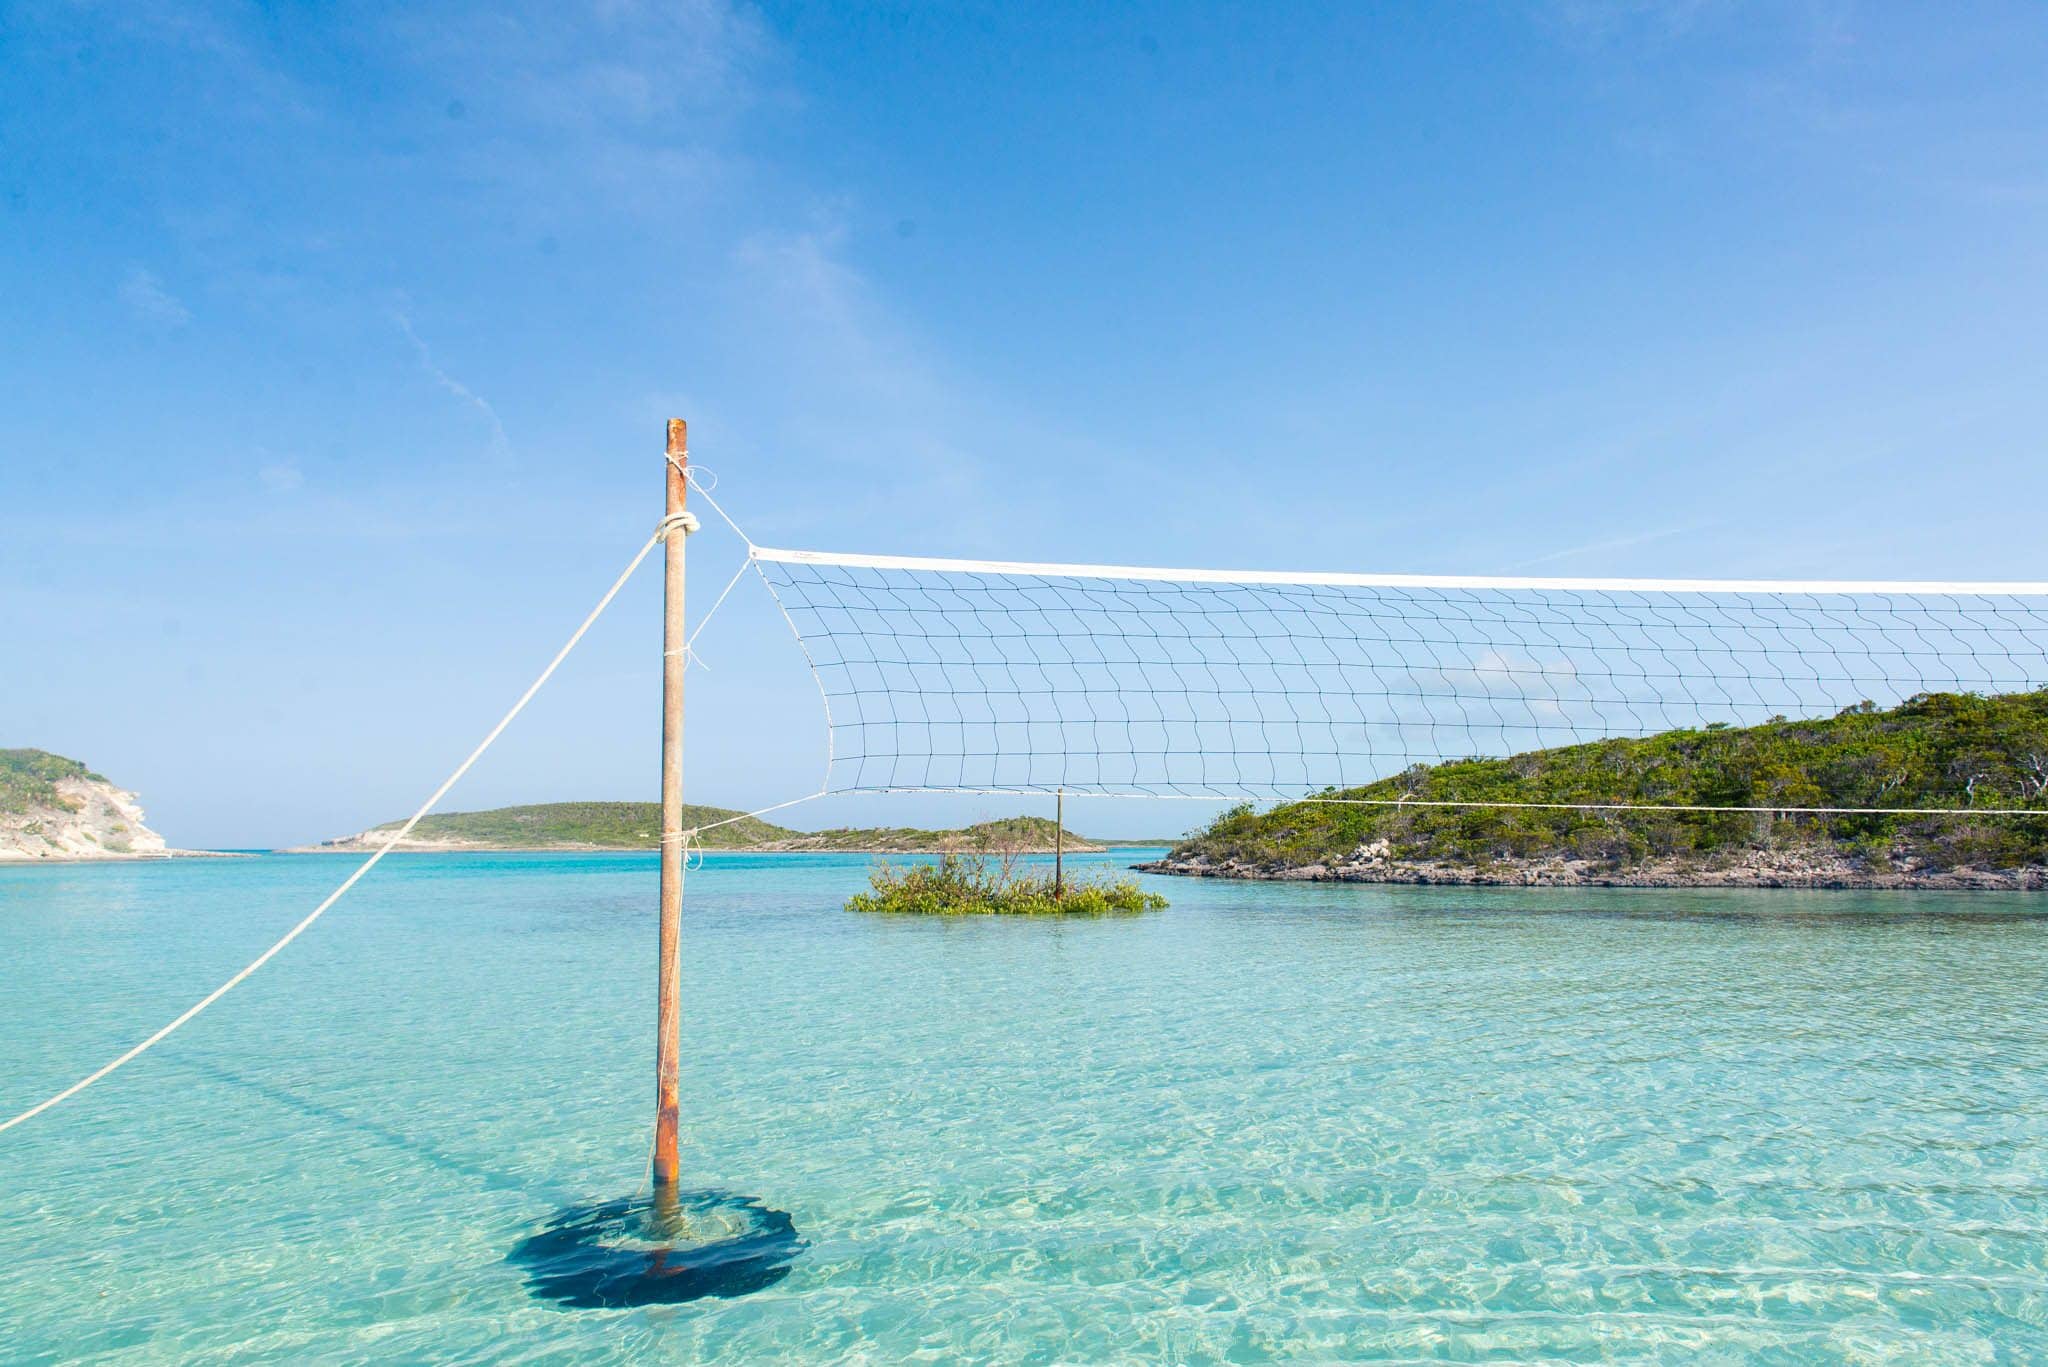 The Most Beautiful Volleyball Court - Staniel Cay